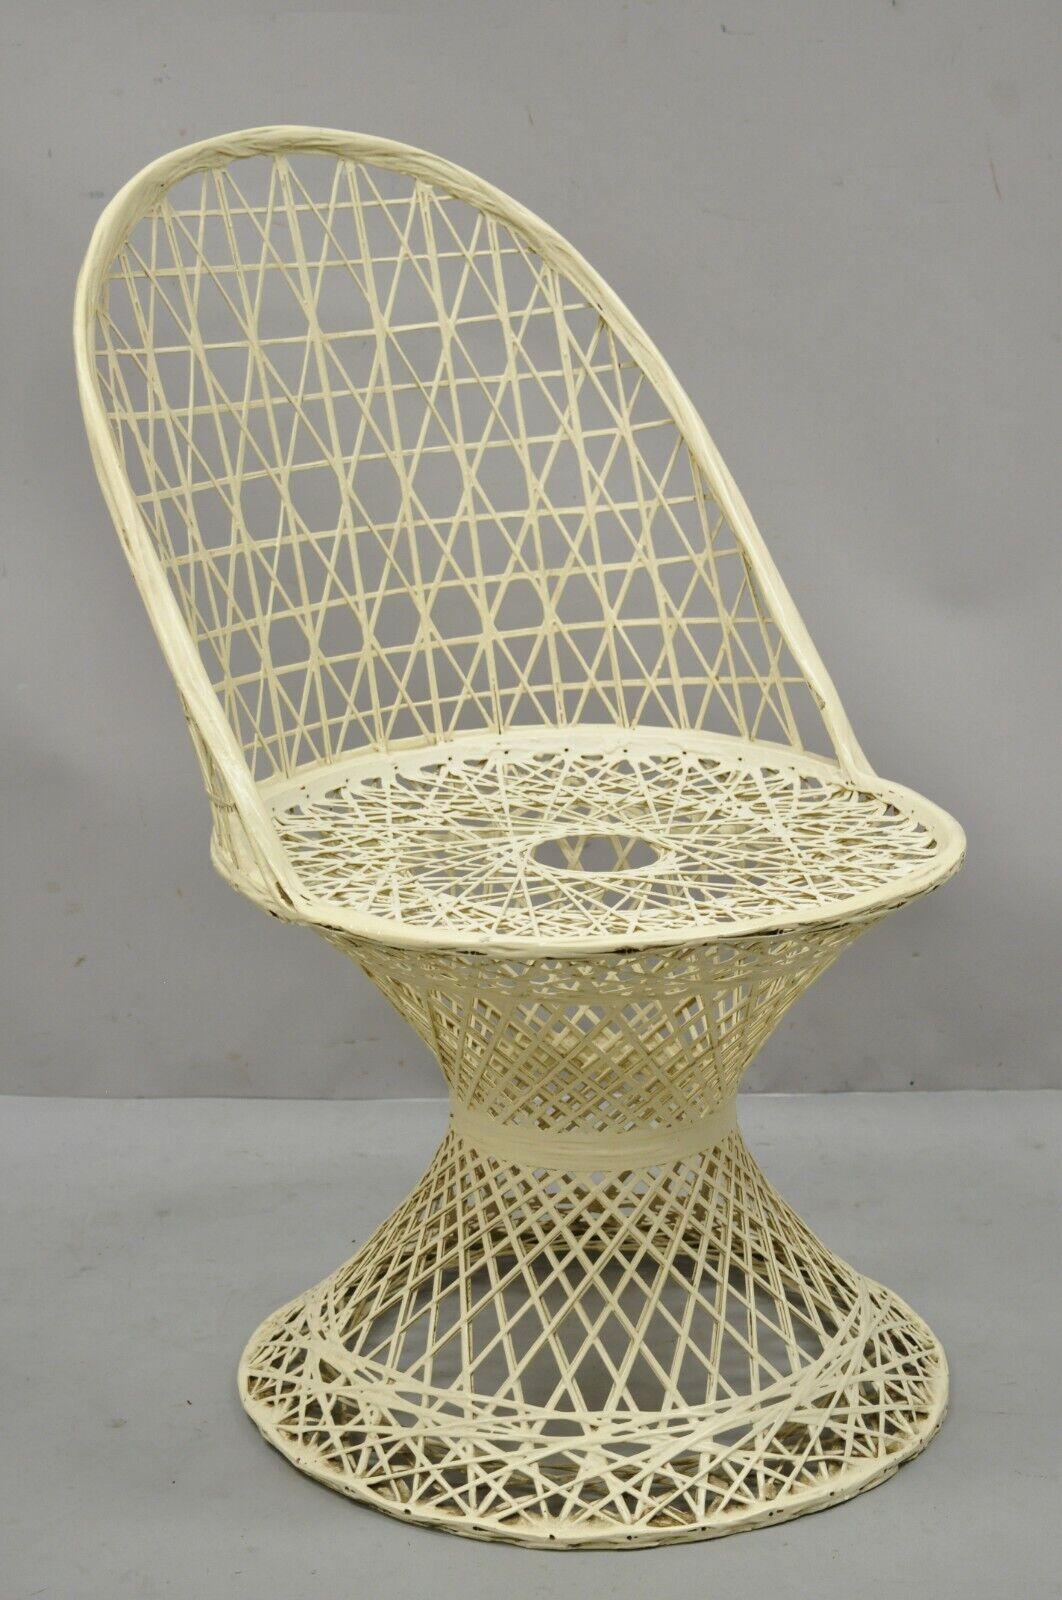 Item: Vintage Russell Woodard woven spun fiberglass Mid-Century Modern dining side chair. Item features round pedestal base, woven spun fiberglass construction, very nice vintage item, great style and form. Circa mid-20th century. Measurements: